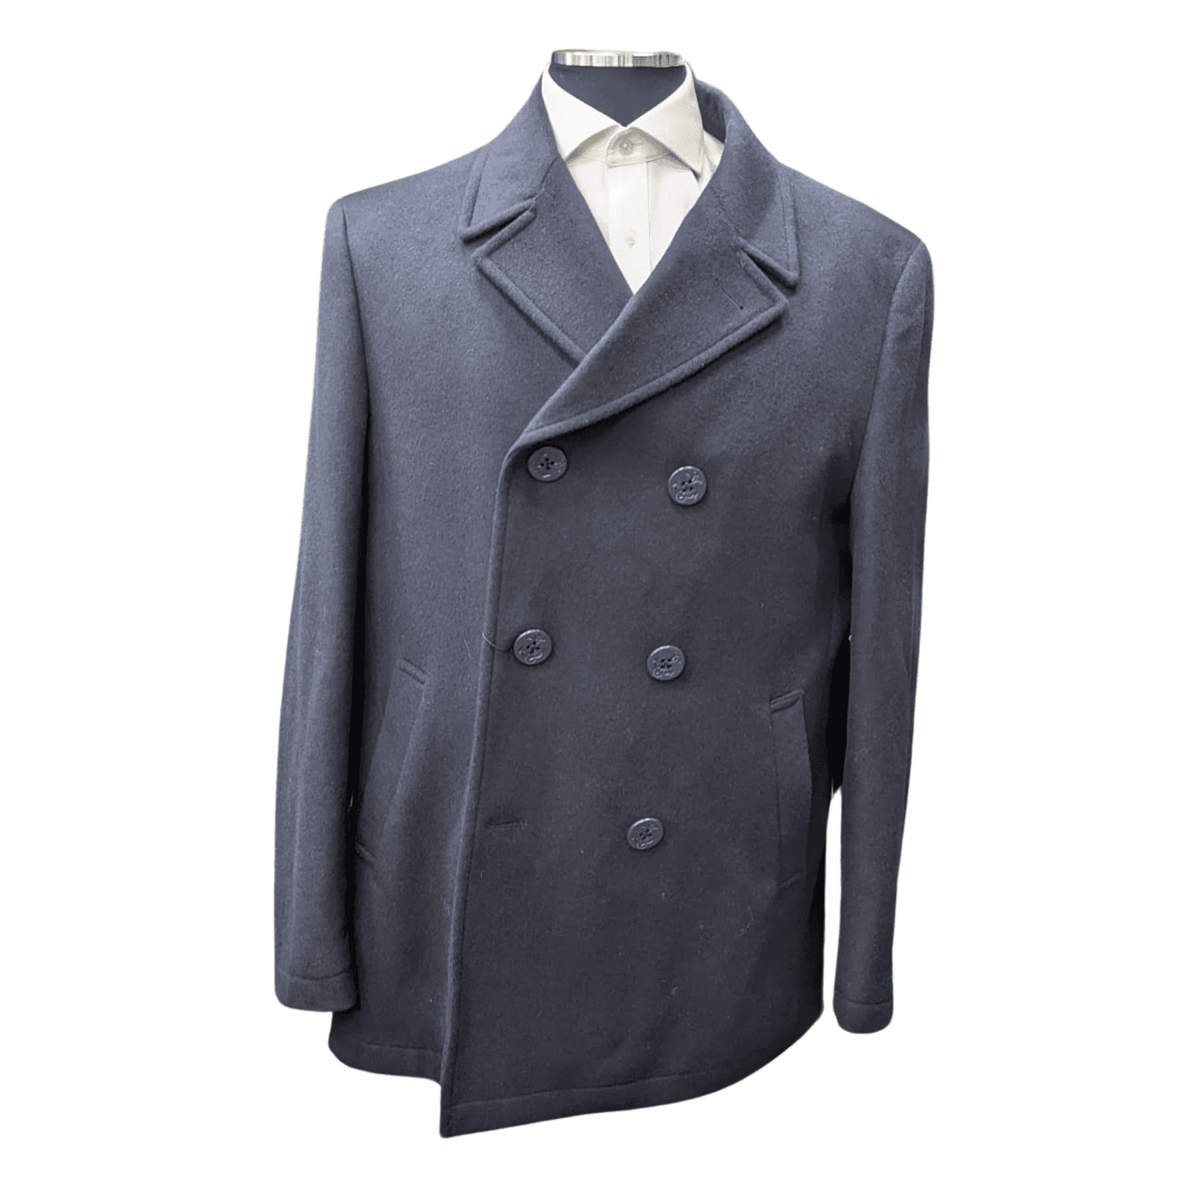 Cianni Mens Solid Navy Blue Double Breasted Wool Blend Peacoat Overcoat